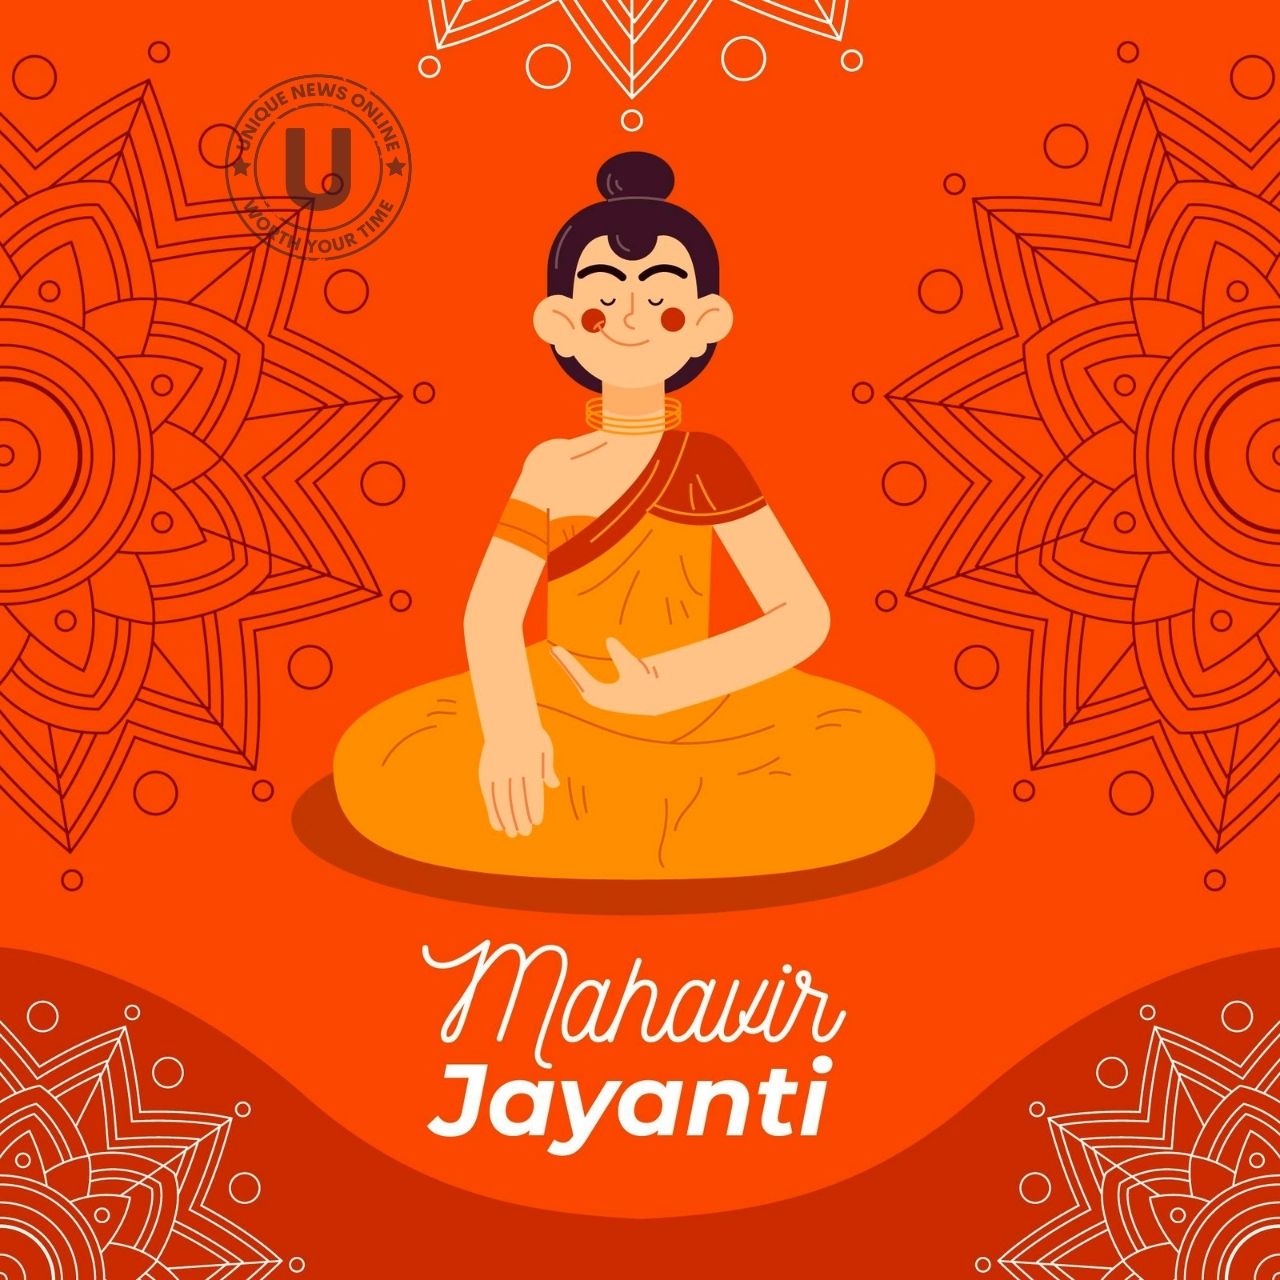 Mahavir Jayanti 2022: Best Wishes, Quotes, Messages, Greetings, Images To Share To Your Loved Ones